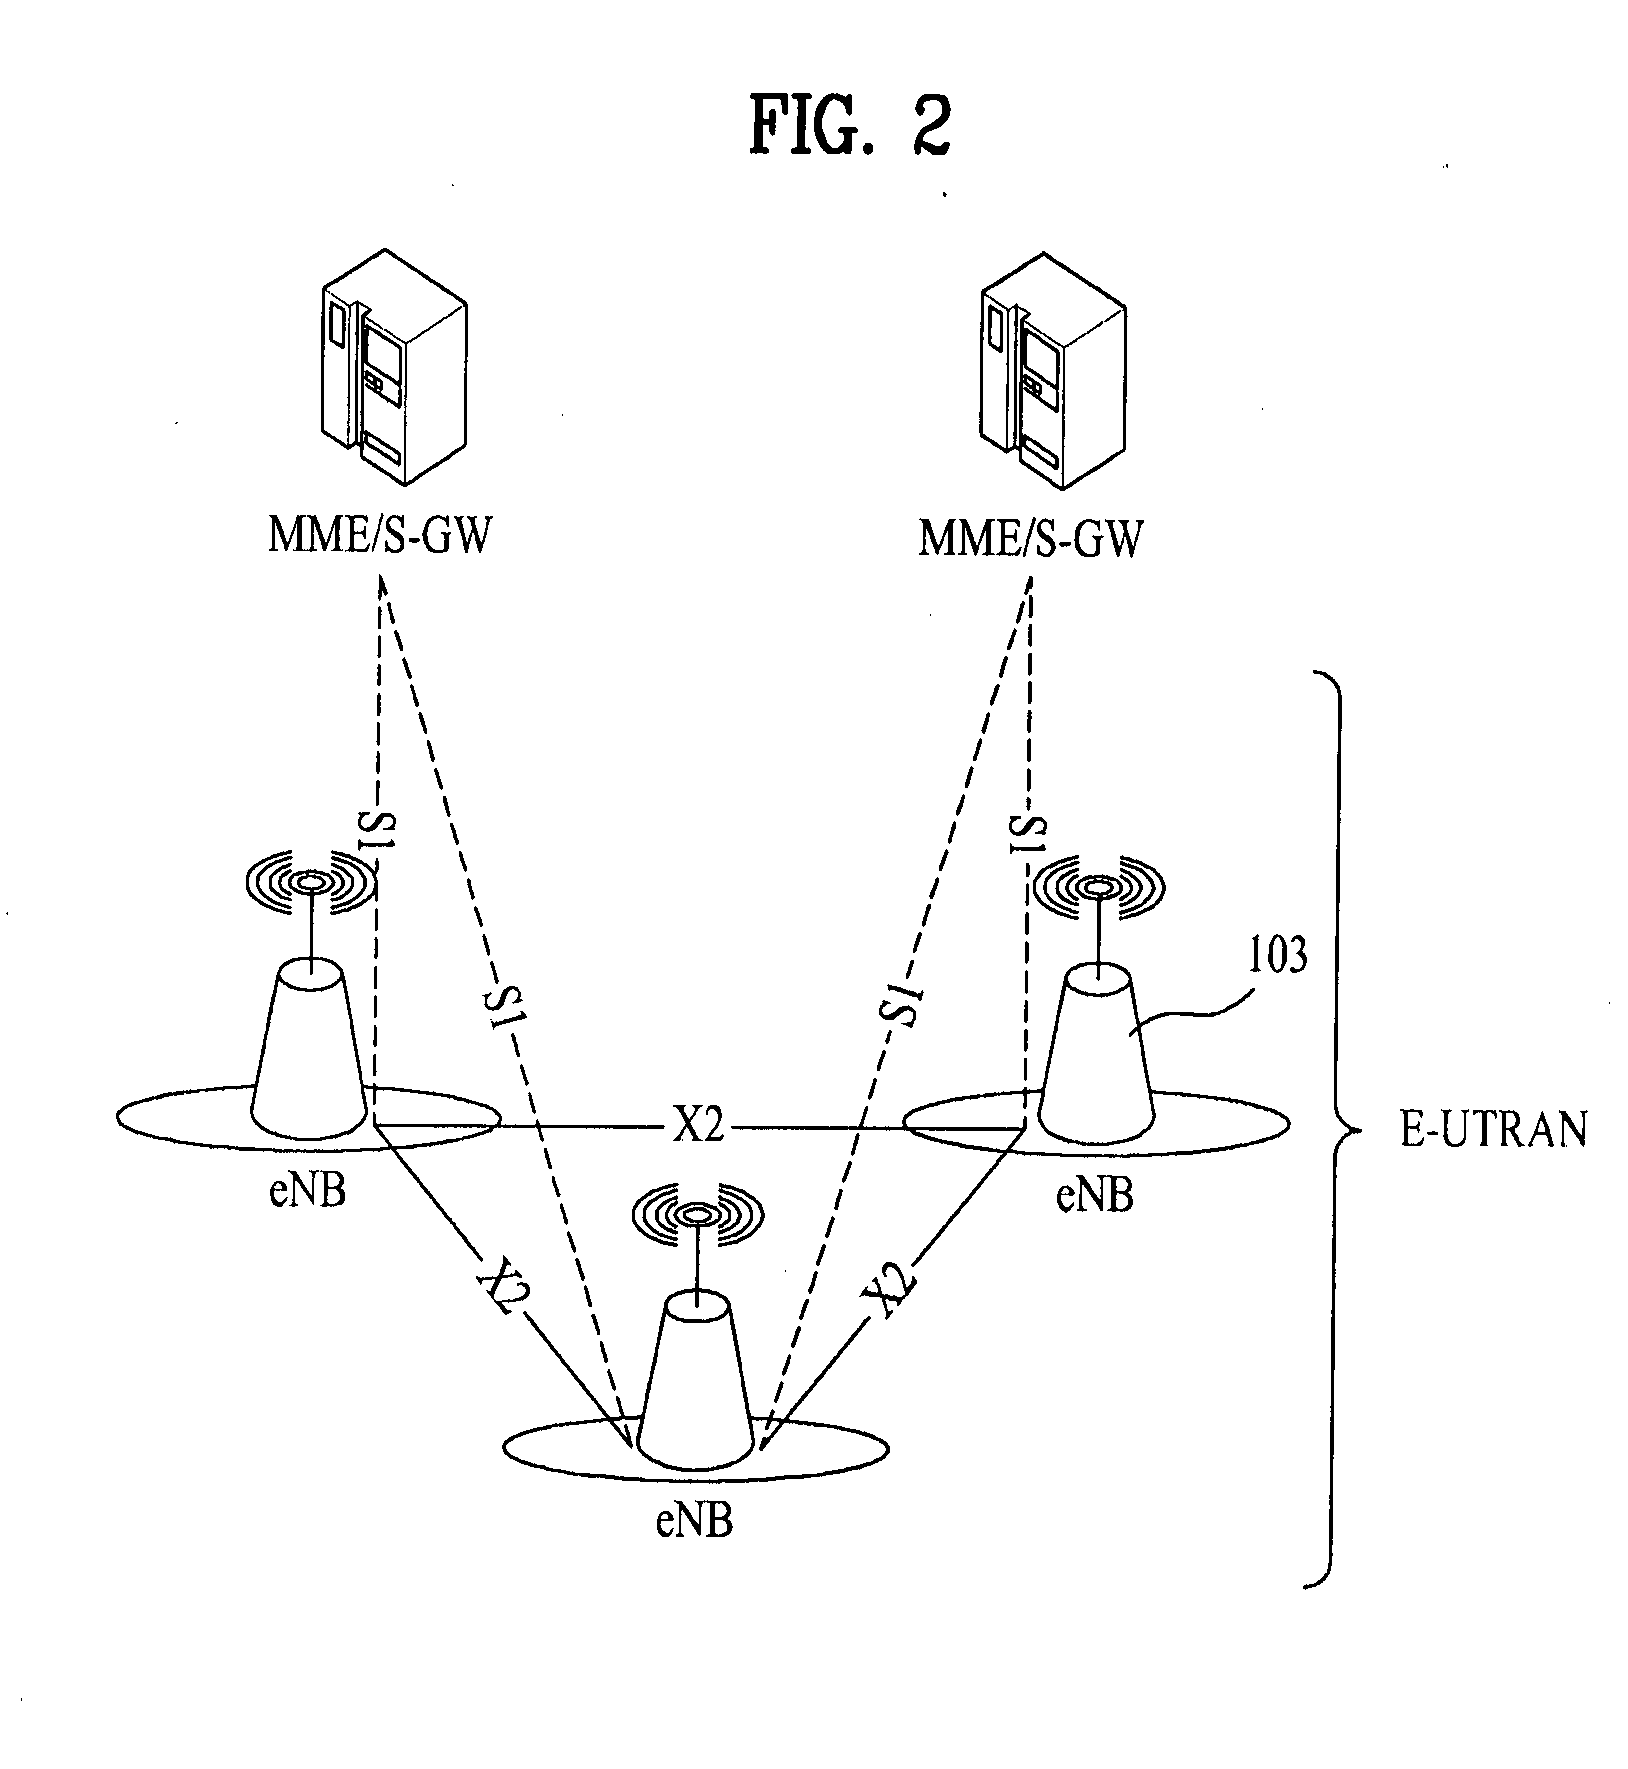 Method and apparatus for performing transmit (TX) power control in convergence network of plural communication systems